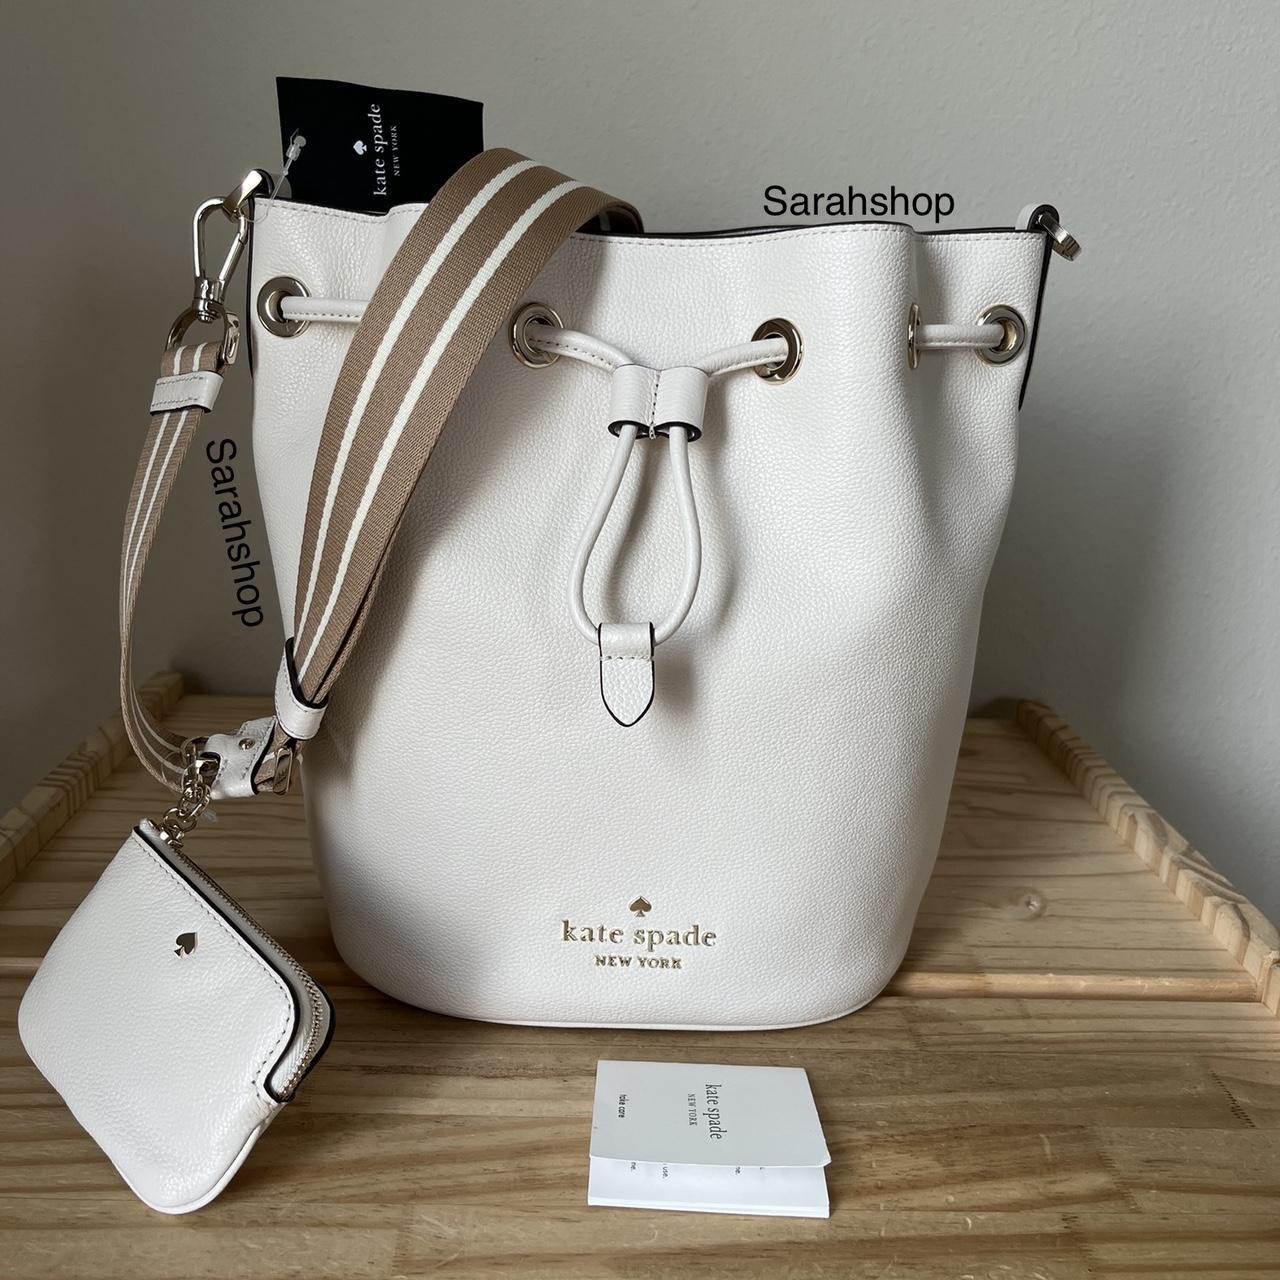 KATE SPADE Rosie bucket bag In Pebbled Leather Parchment White KA987 NEW